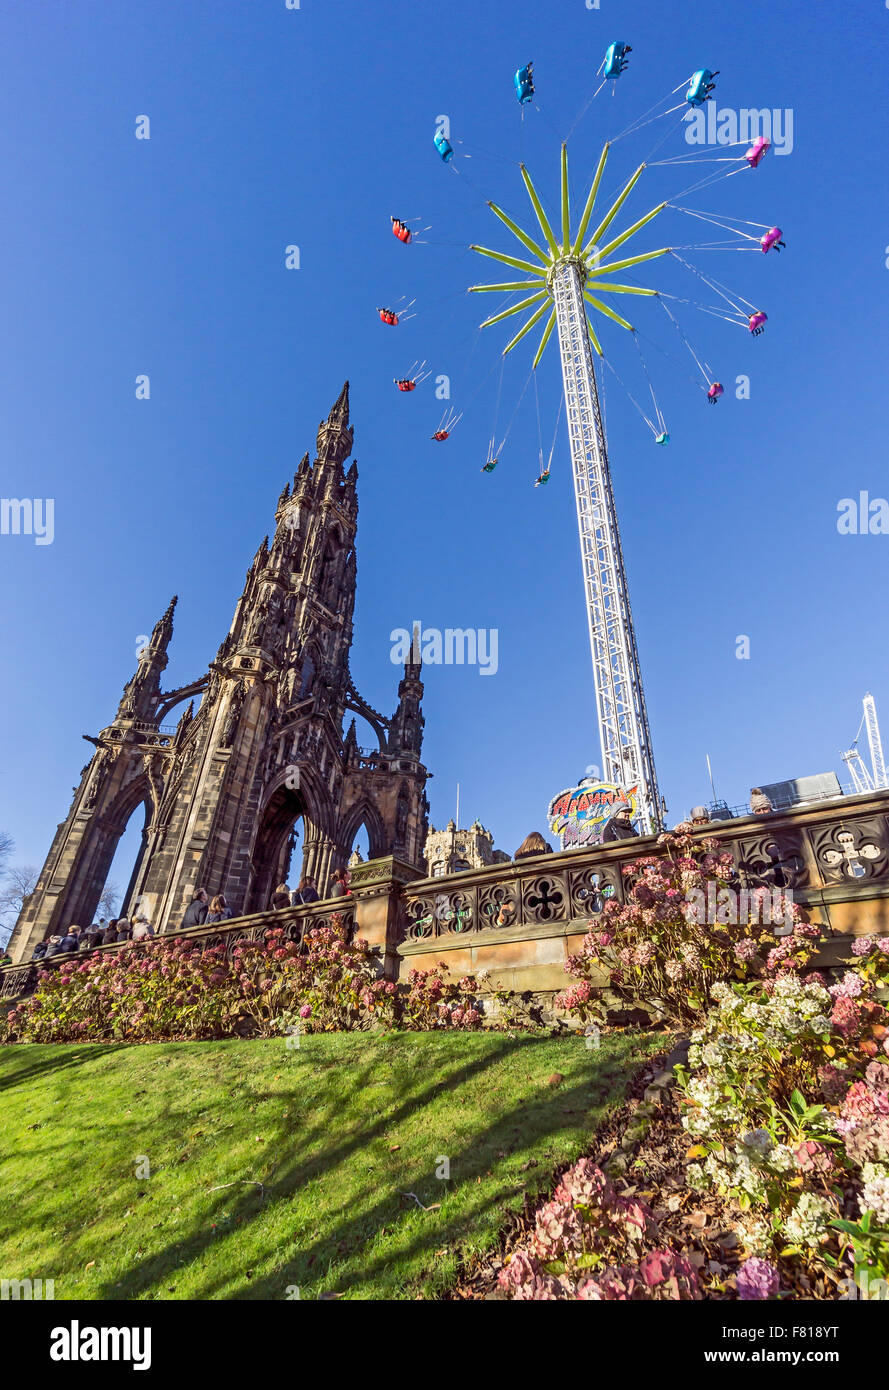 Edinburgh Christmas market 2015 with market stalls  Star Flyer as well as Scott Monument and flowers Stock Photo